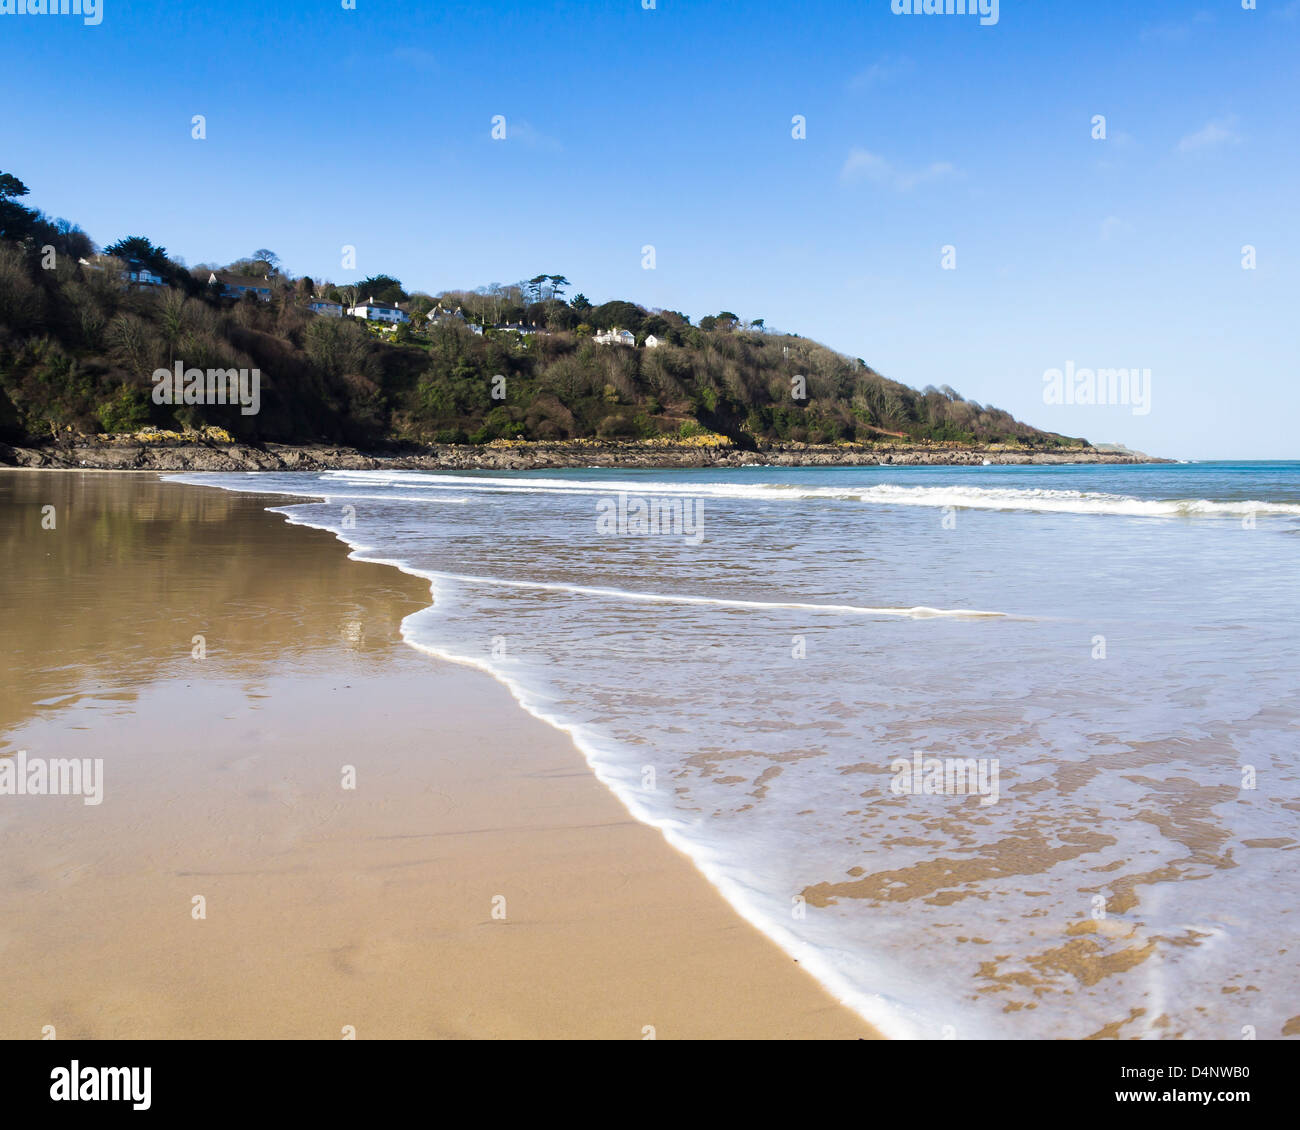 The beautiful sandy beach at Carbis Bay near St Ives Cornwall England UK Stock Photo